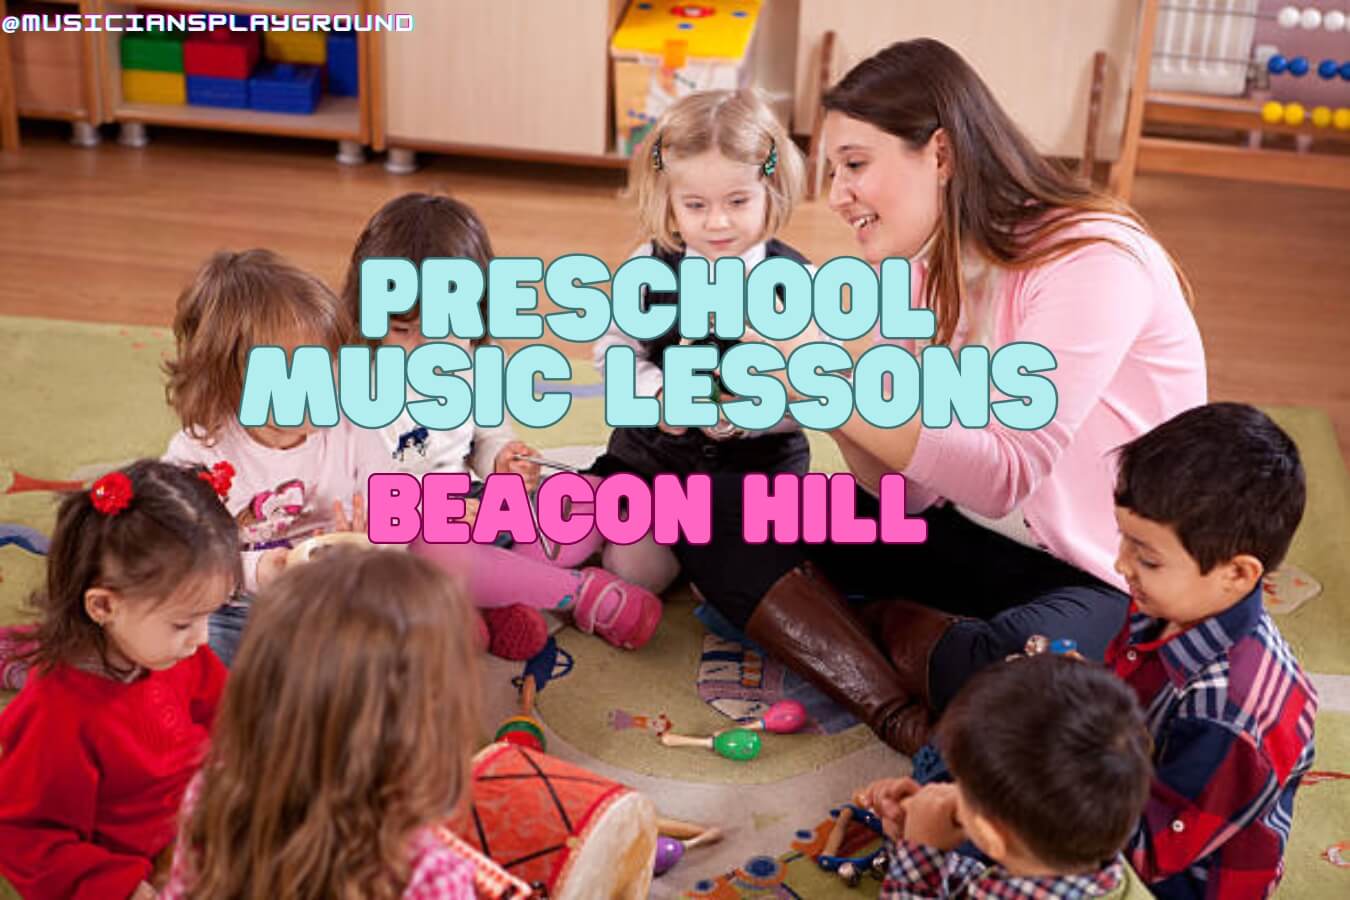 Preschool Music Lessons in Beacon Hill, Massachusetts: Music Education for Young Children